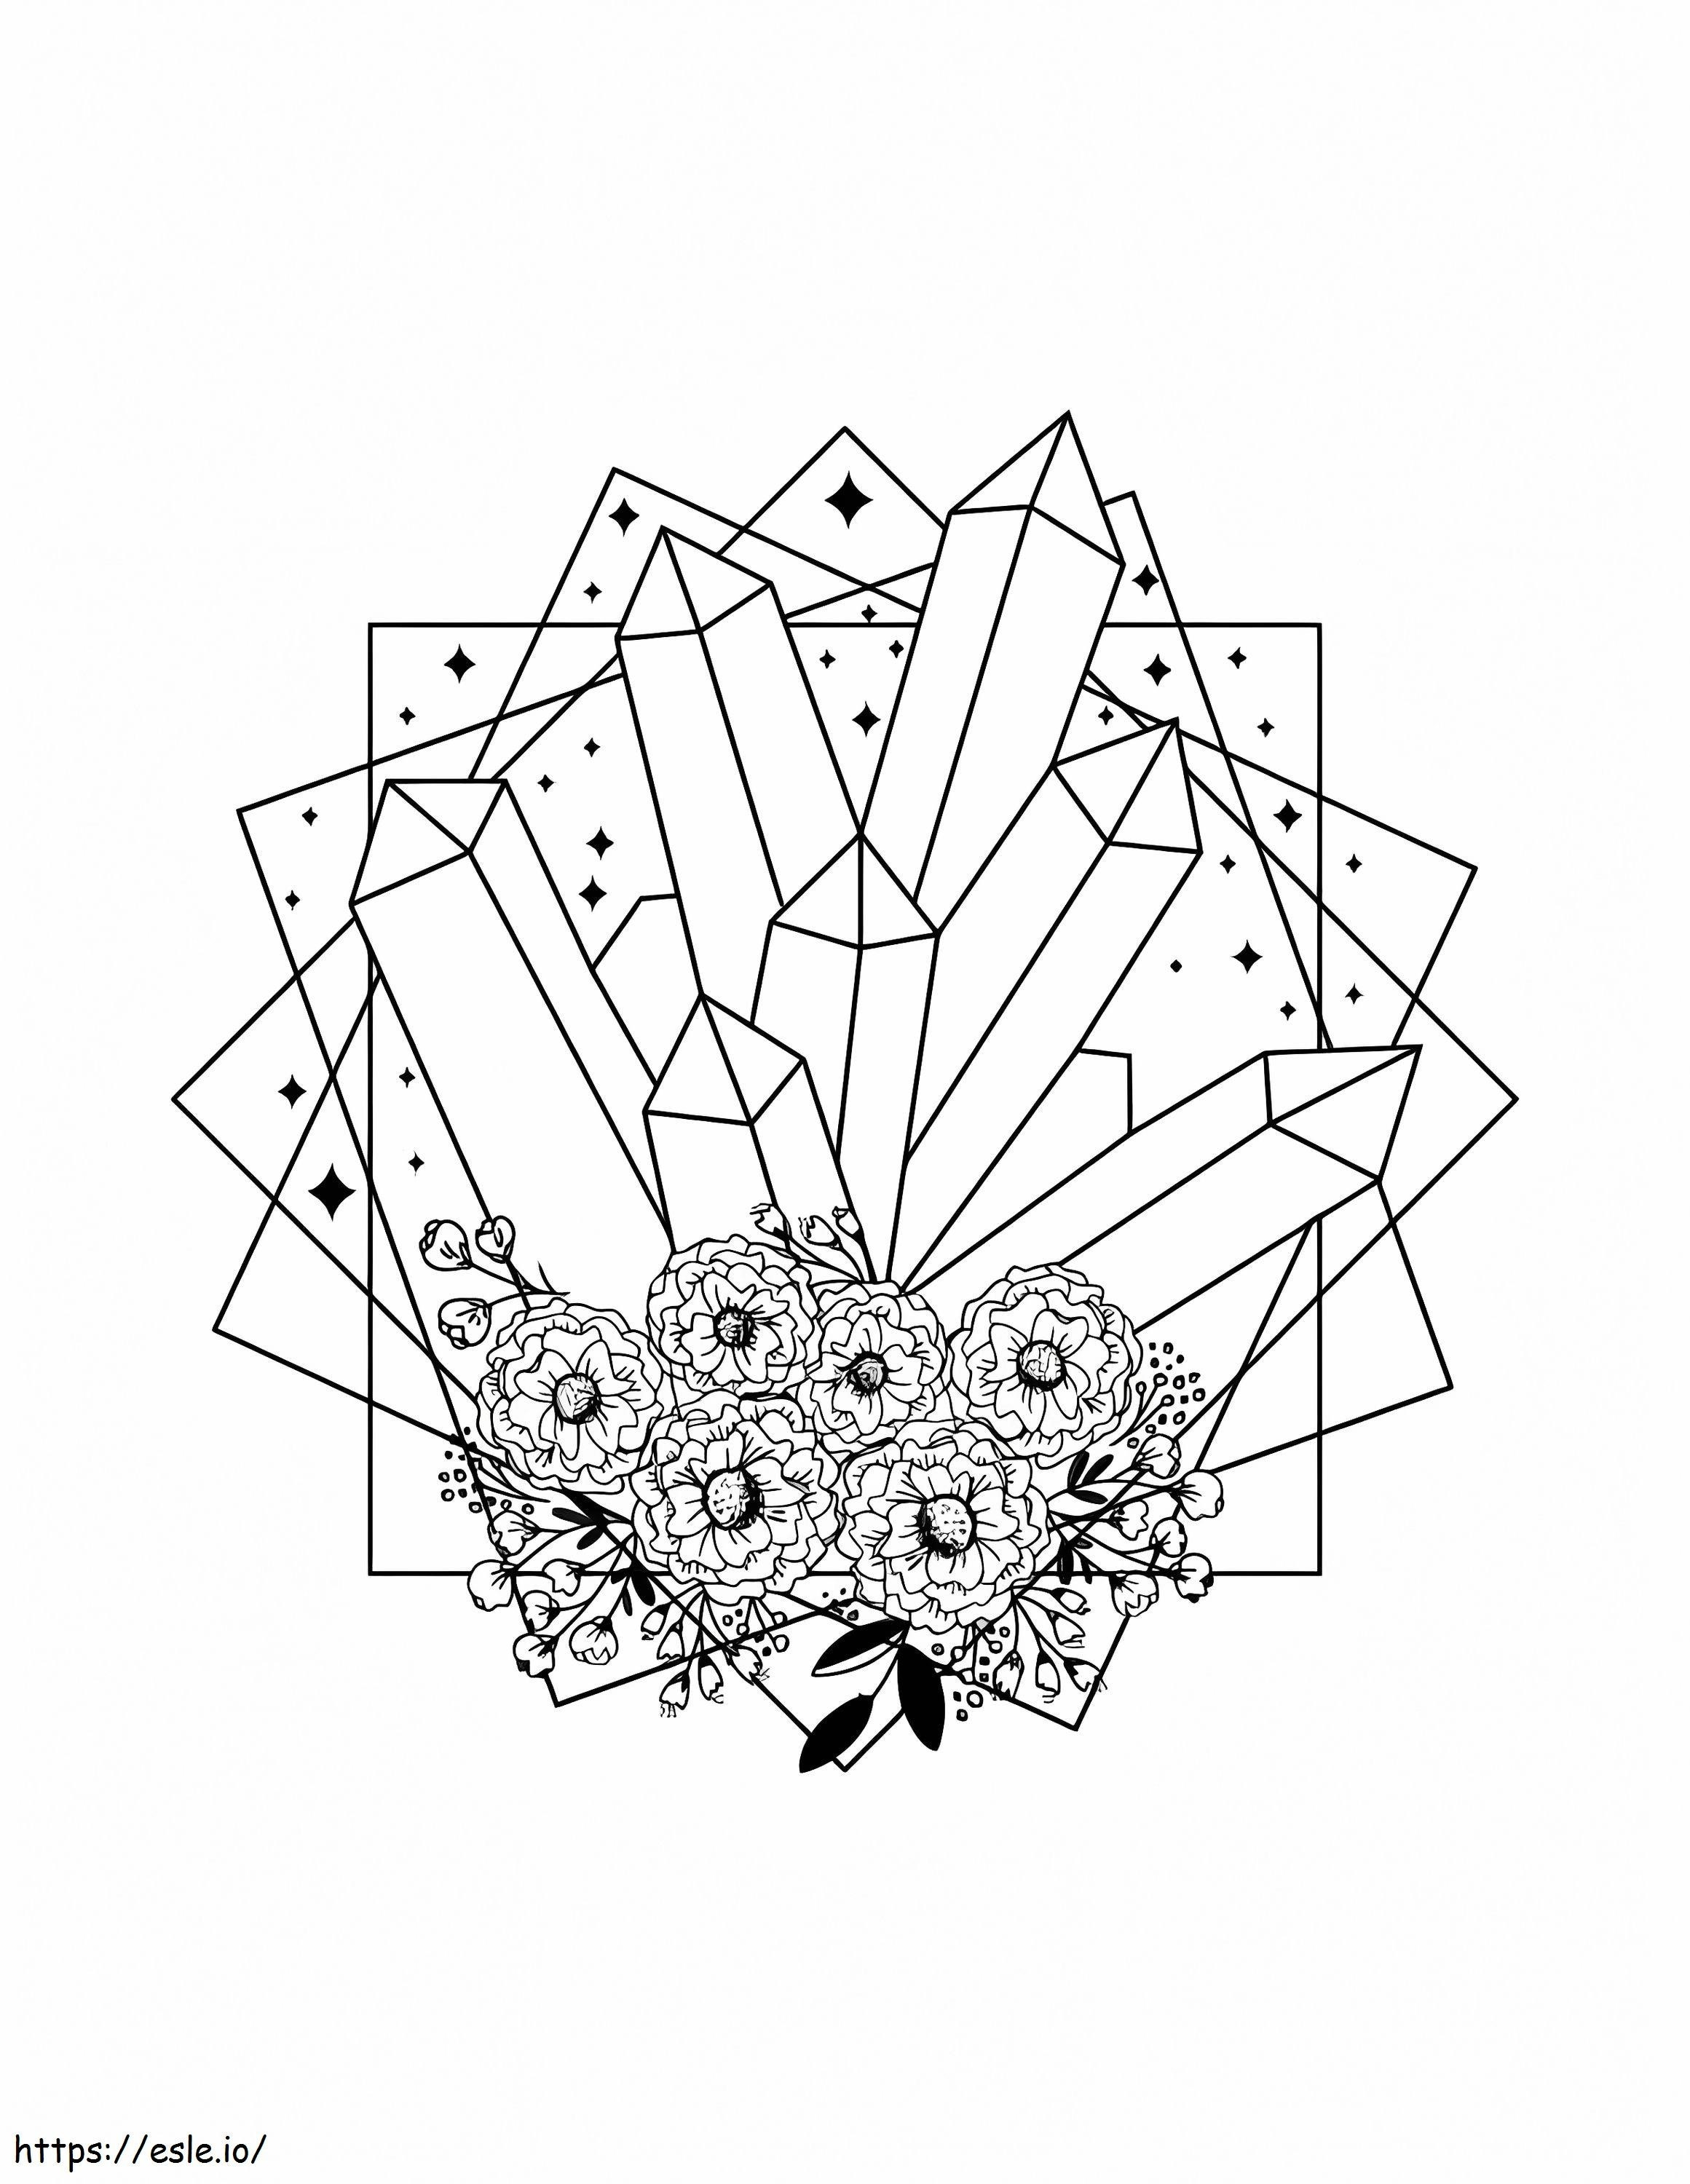 Crystal 1 coloring page